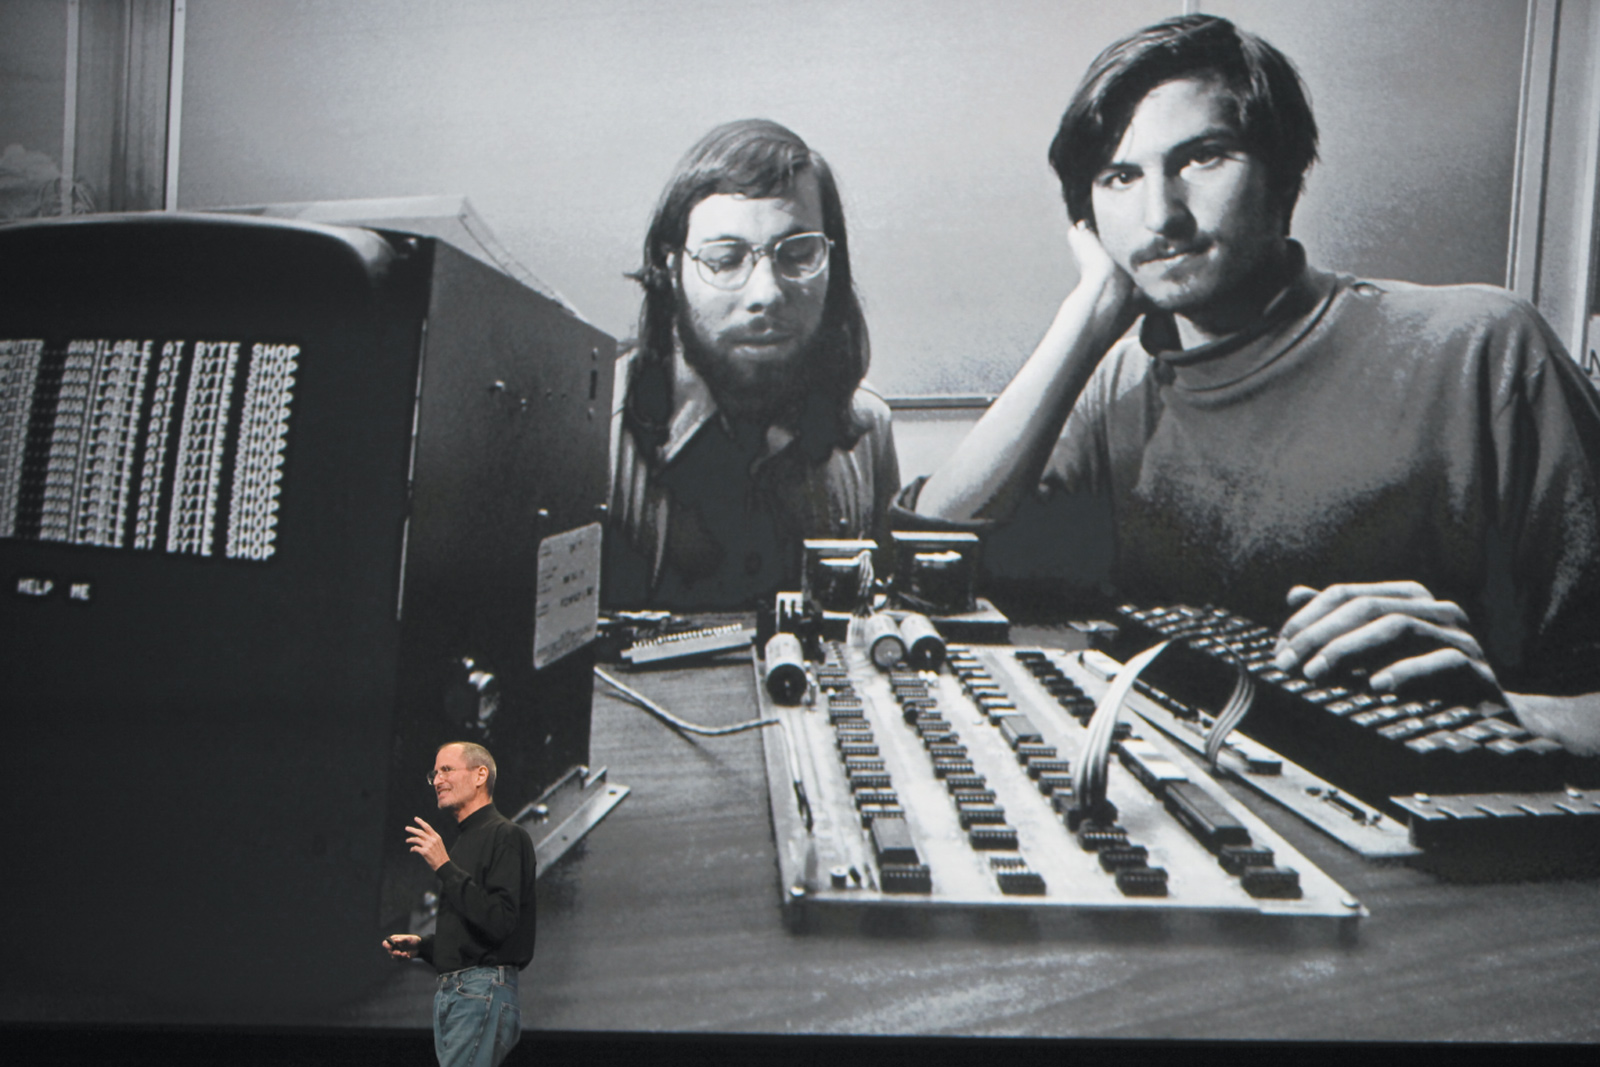 Steve Jobs speaking at a conference in San Francisco in front of a photograph of himself and Apple cofounder Steve Wozniak, 2010